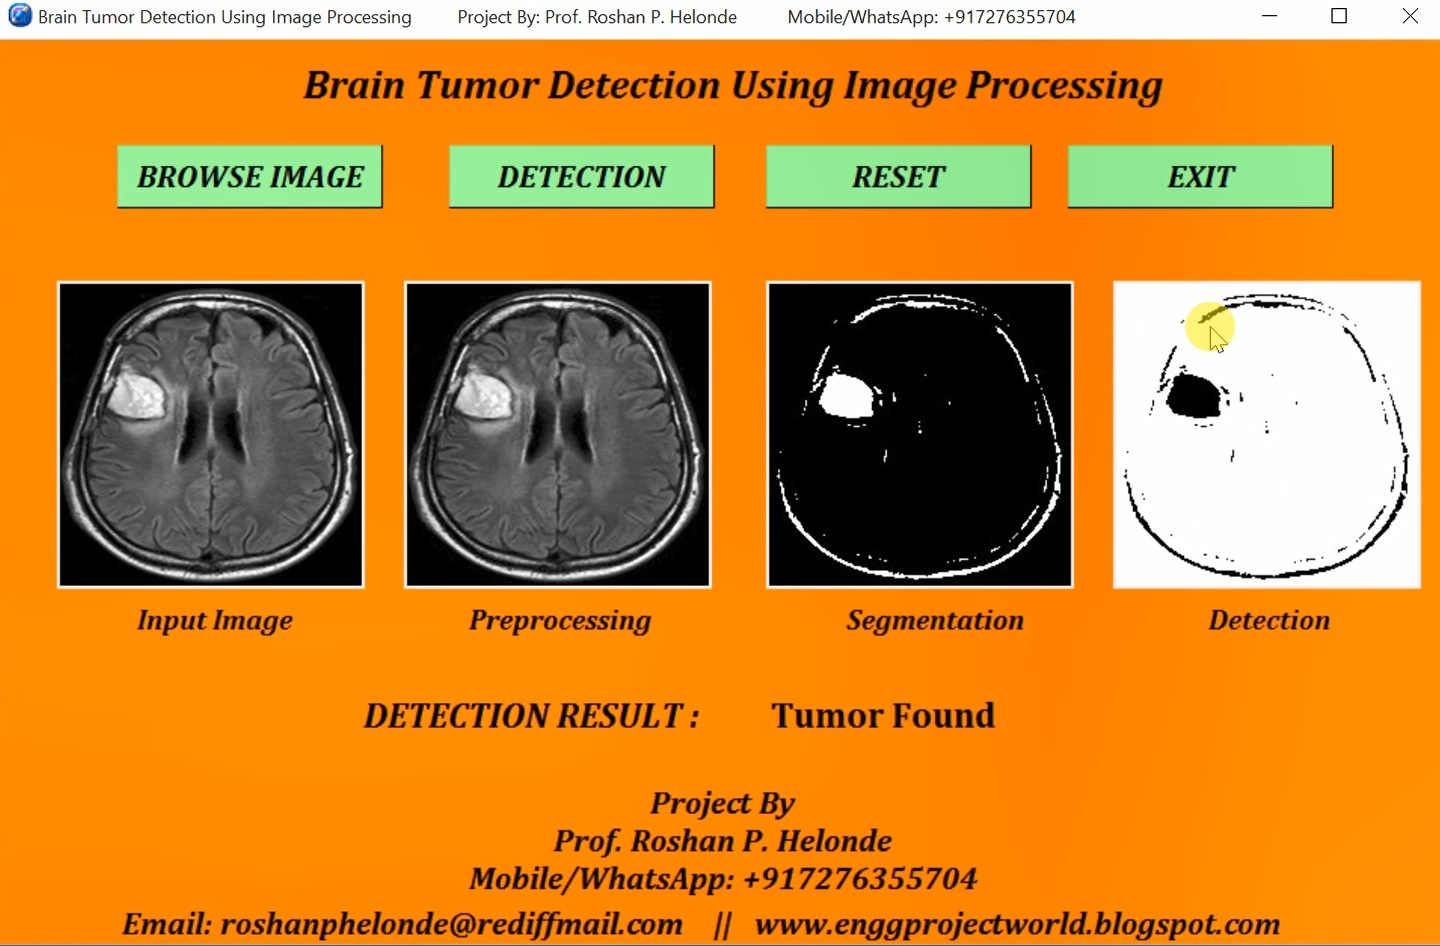 research papers on medical image processing based on tumor detection